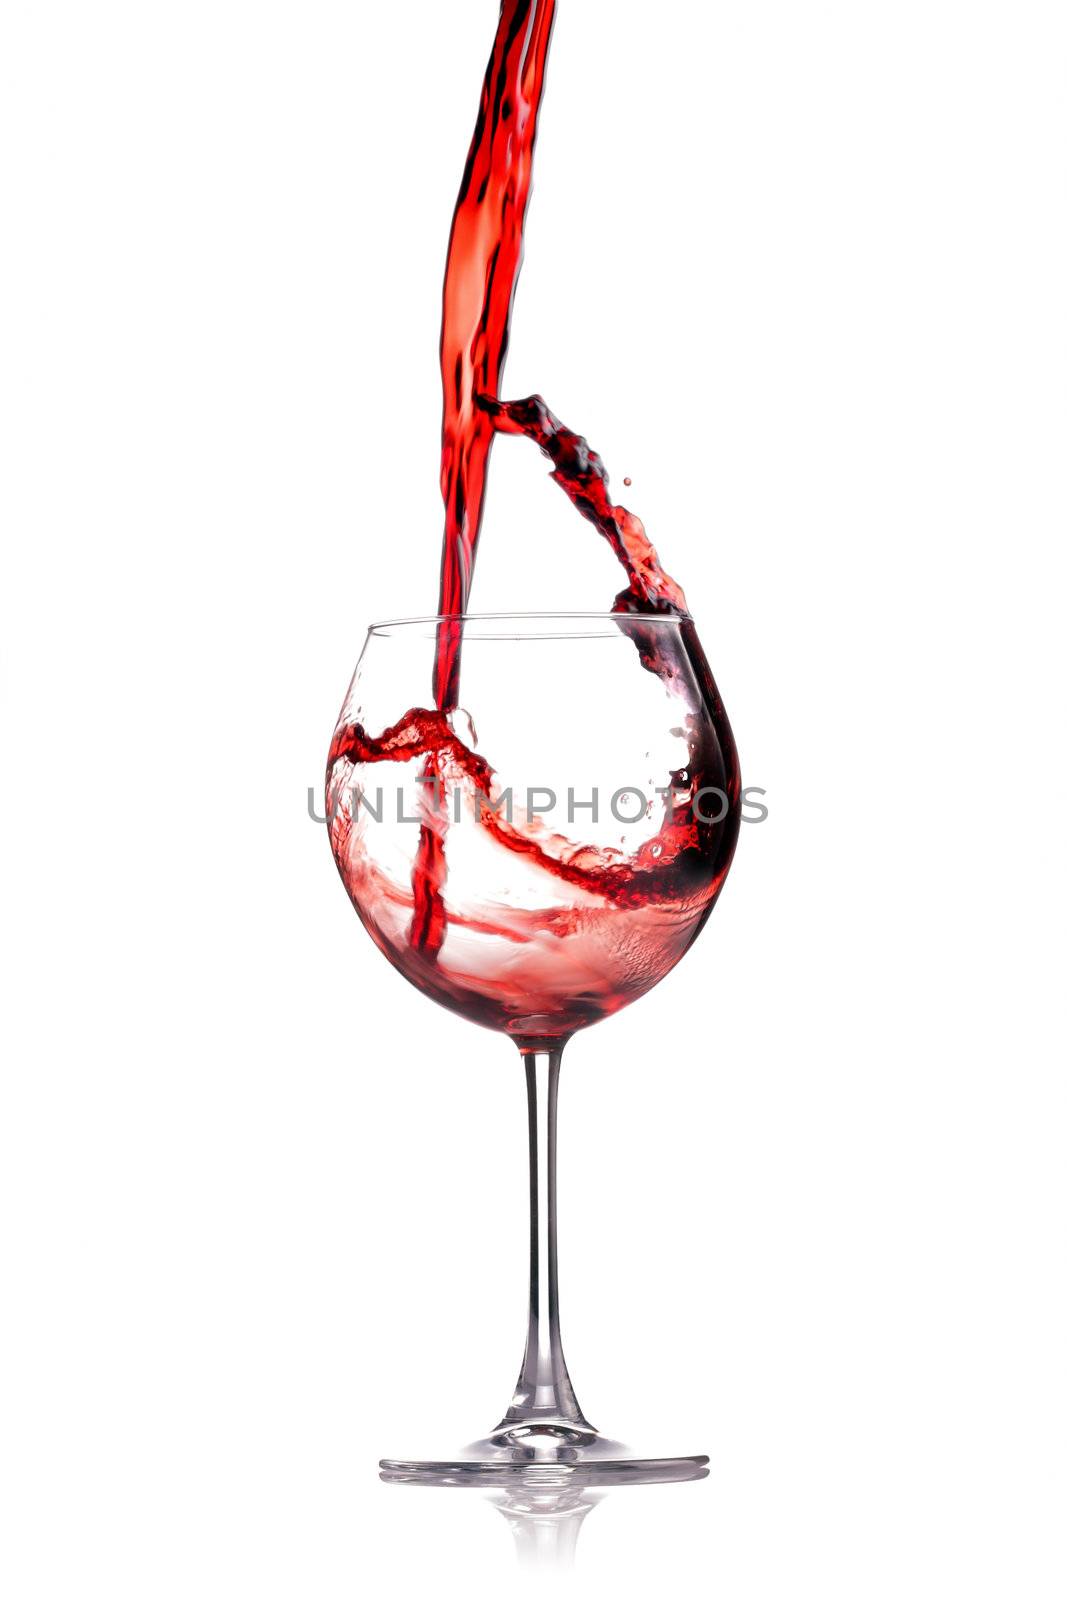 red wine splashing in a glass, isolated on white